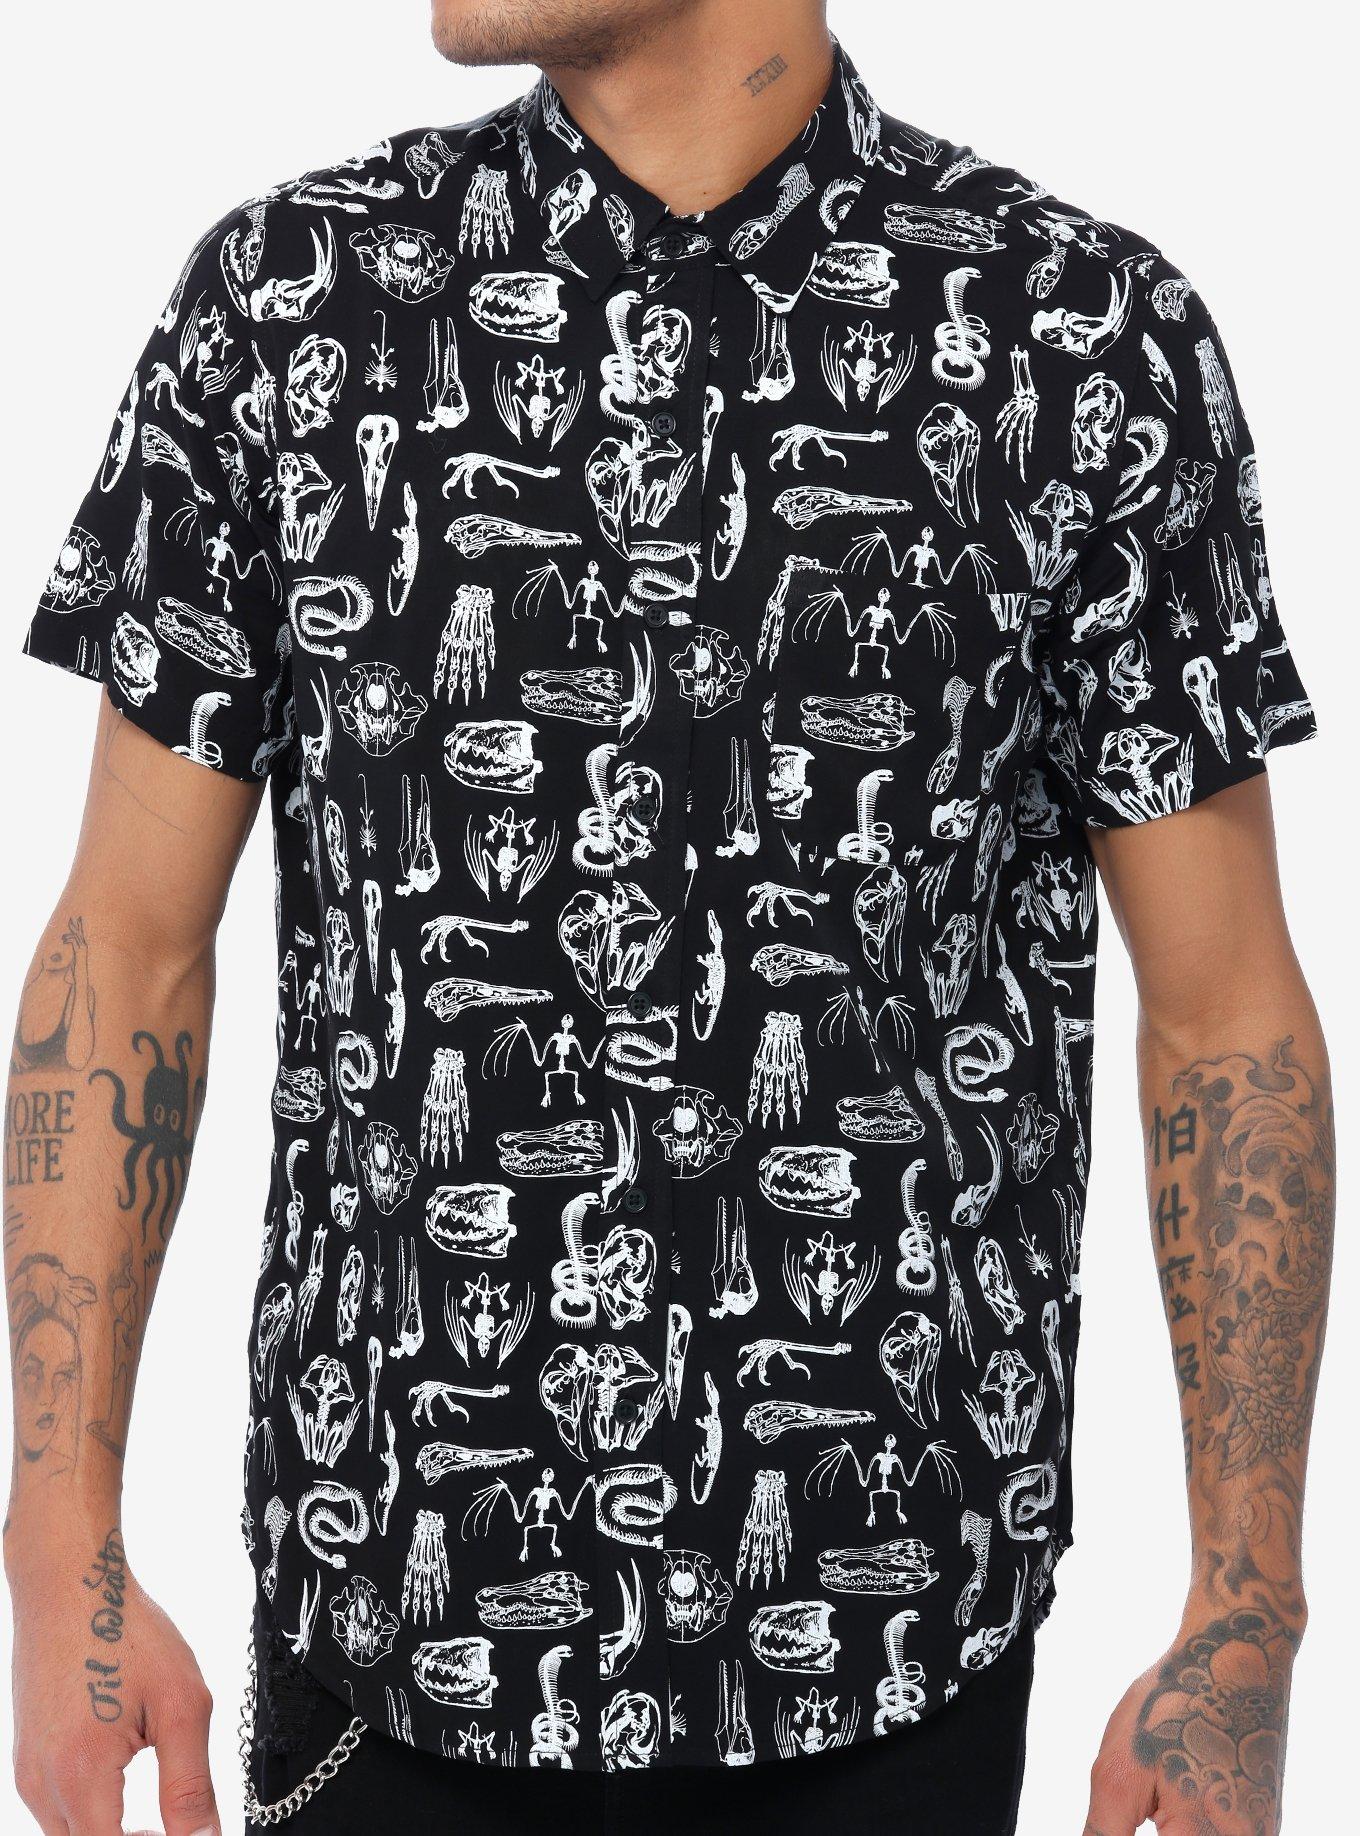 Creature Skeletons Woven Button-Up